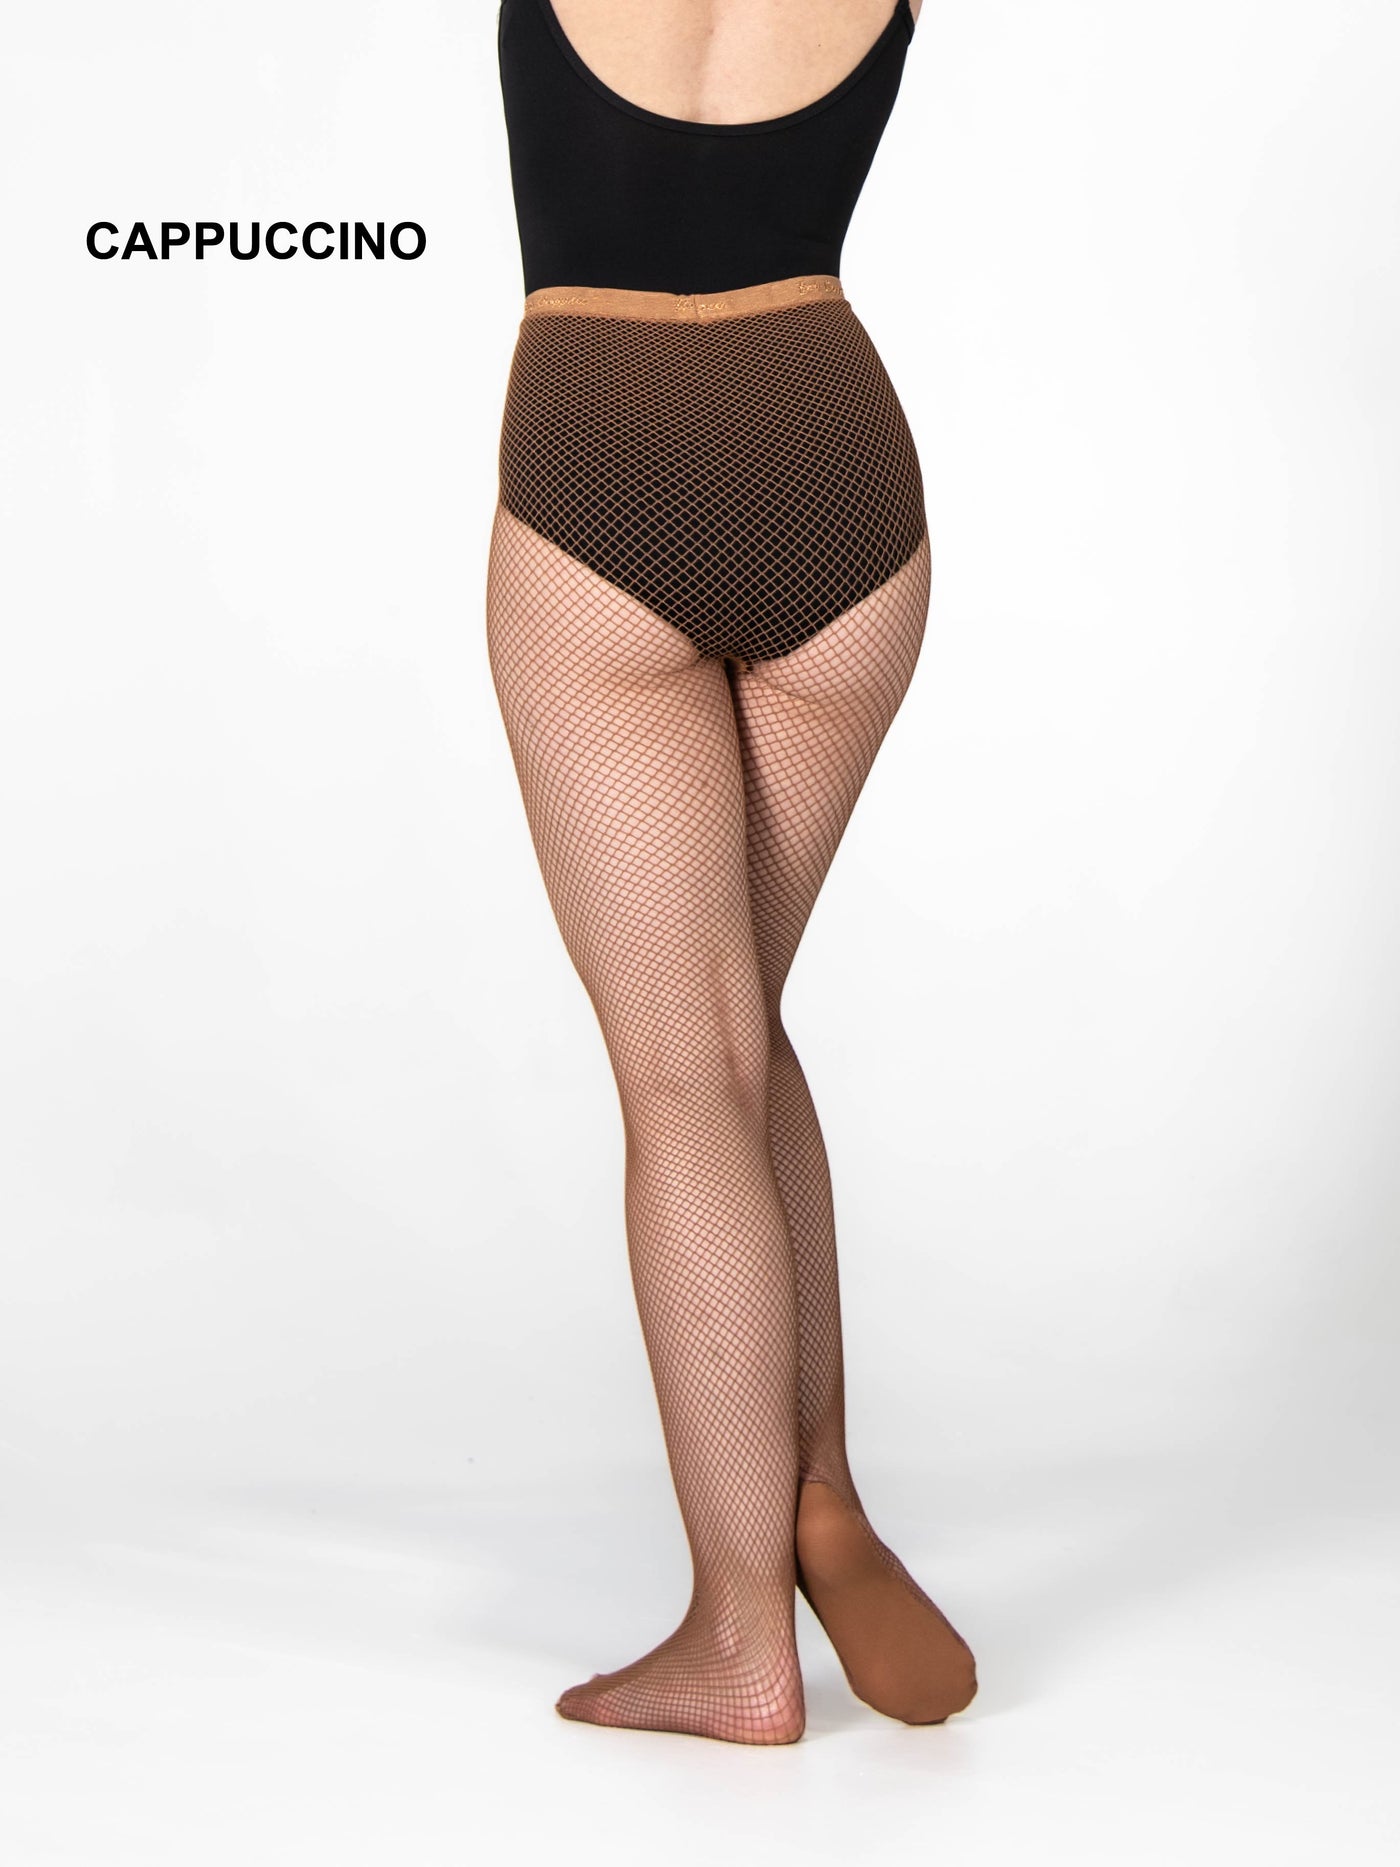 TotalSTRETCH Seamless Heavy Gauge Fishnet Padded Foot Tights